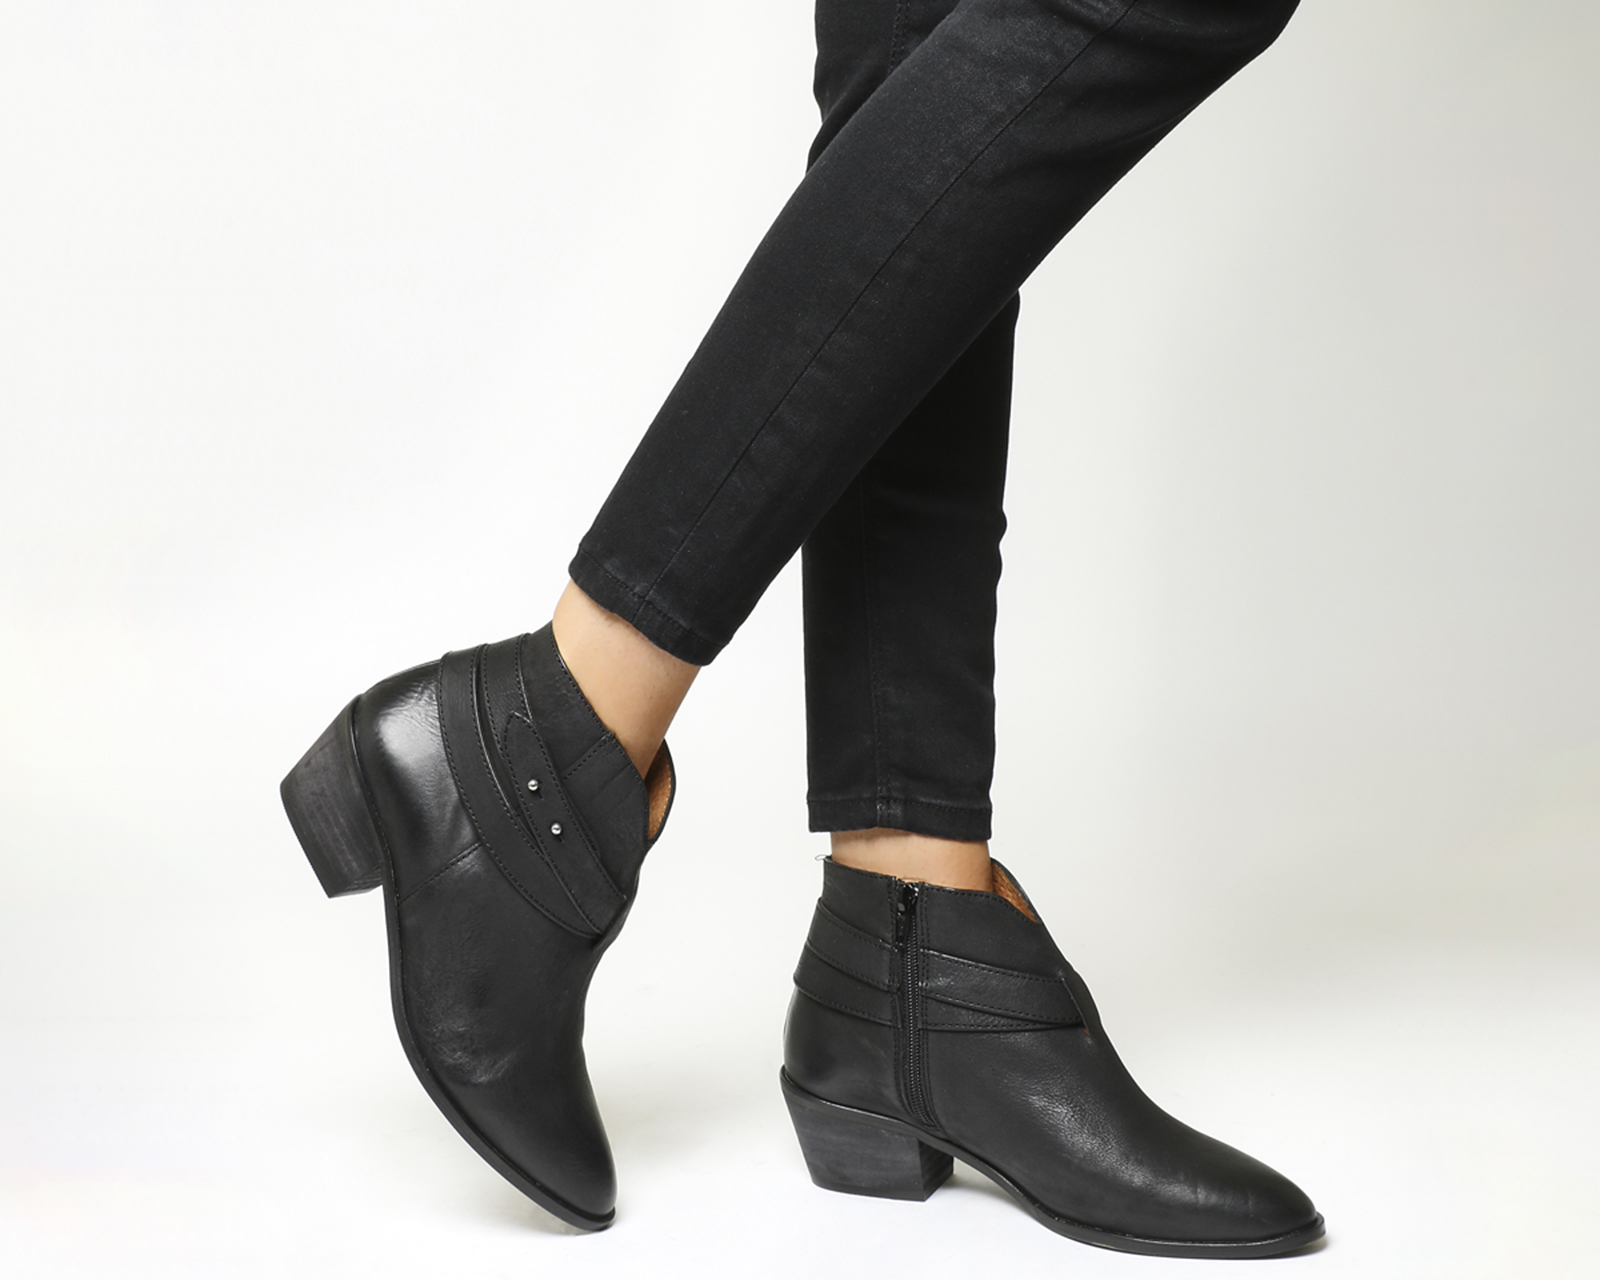 OFFICELoyal Western BootsBlack Leather